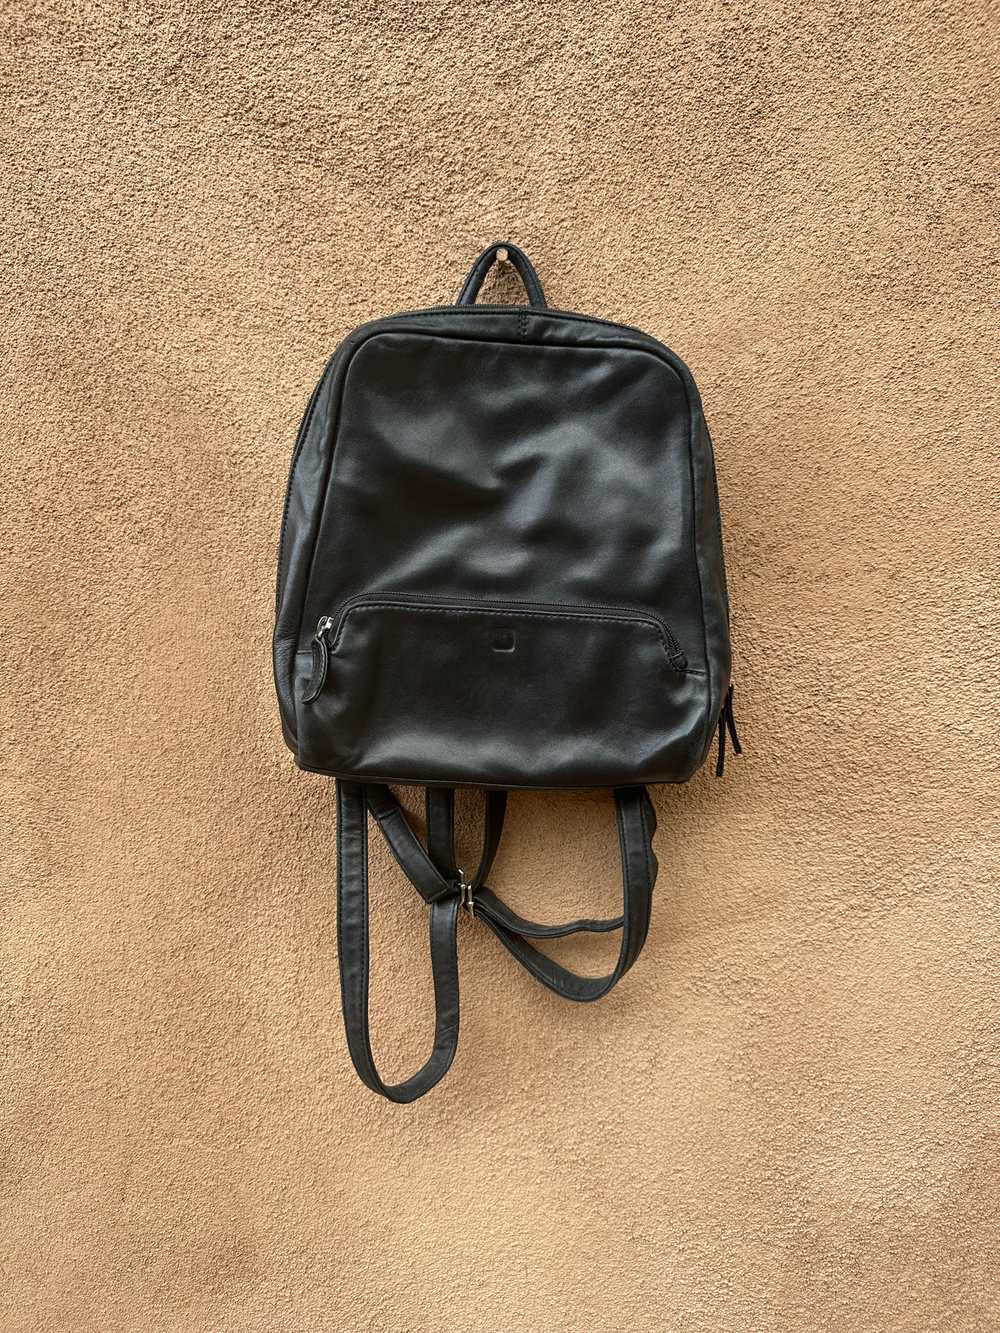 Wilsons Leather Black Leather Backpack - image 1